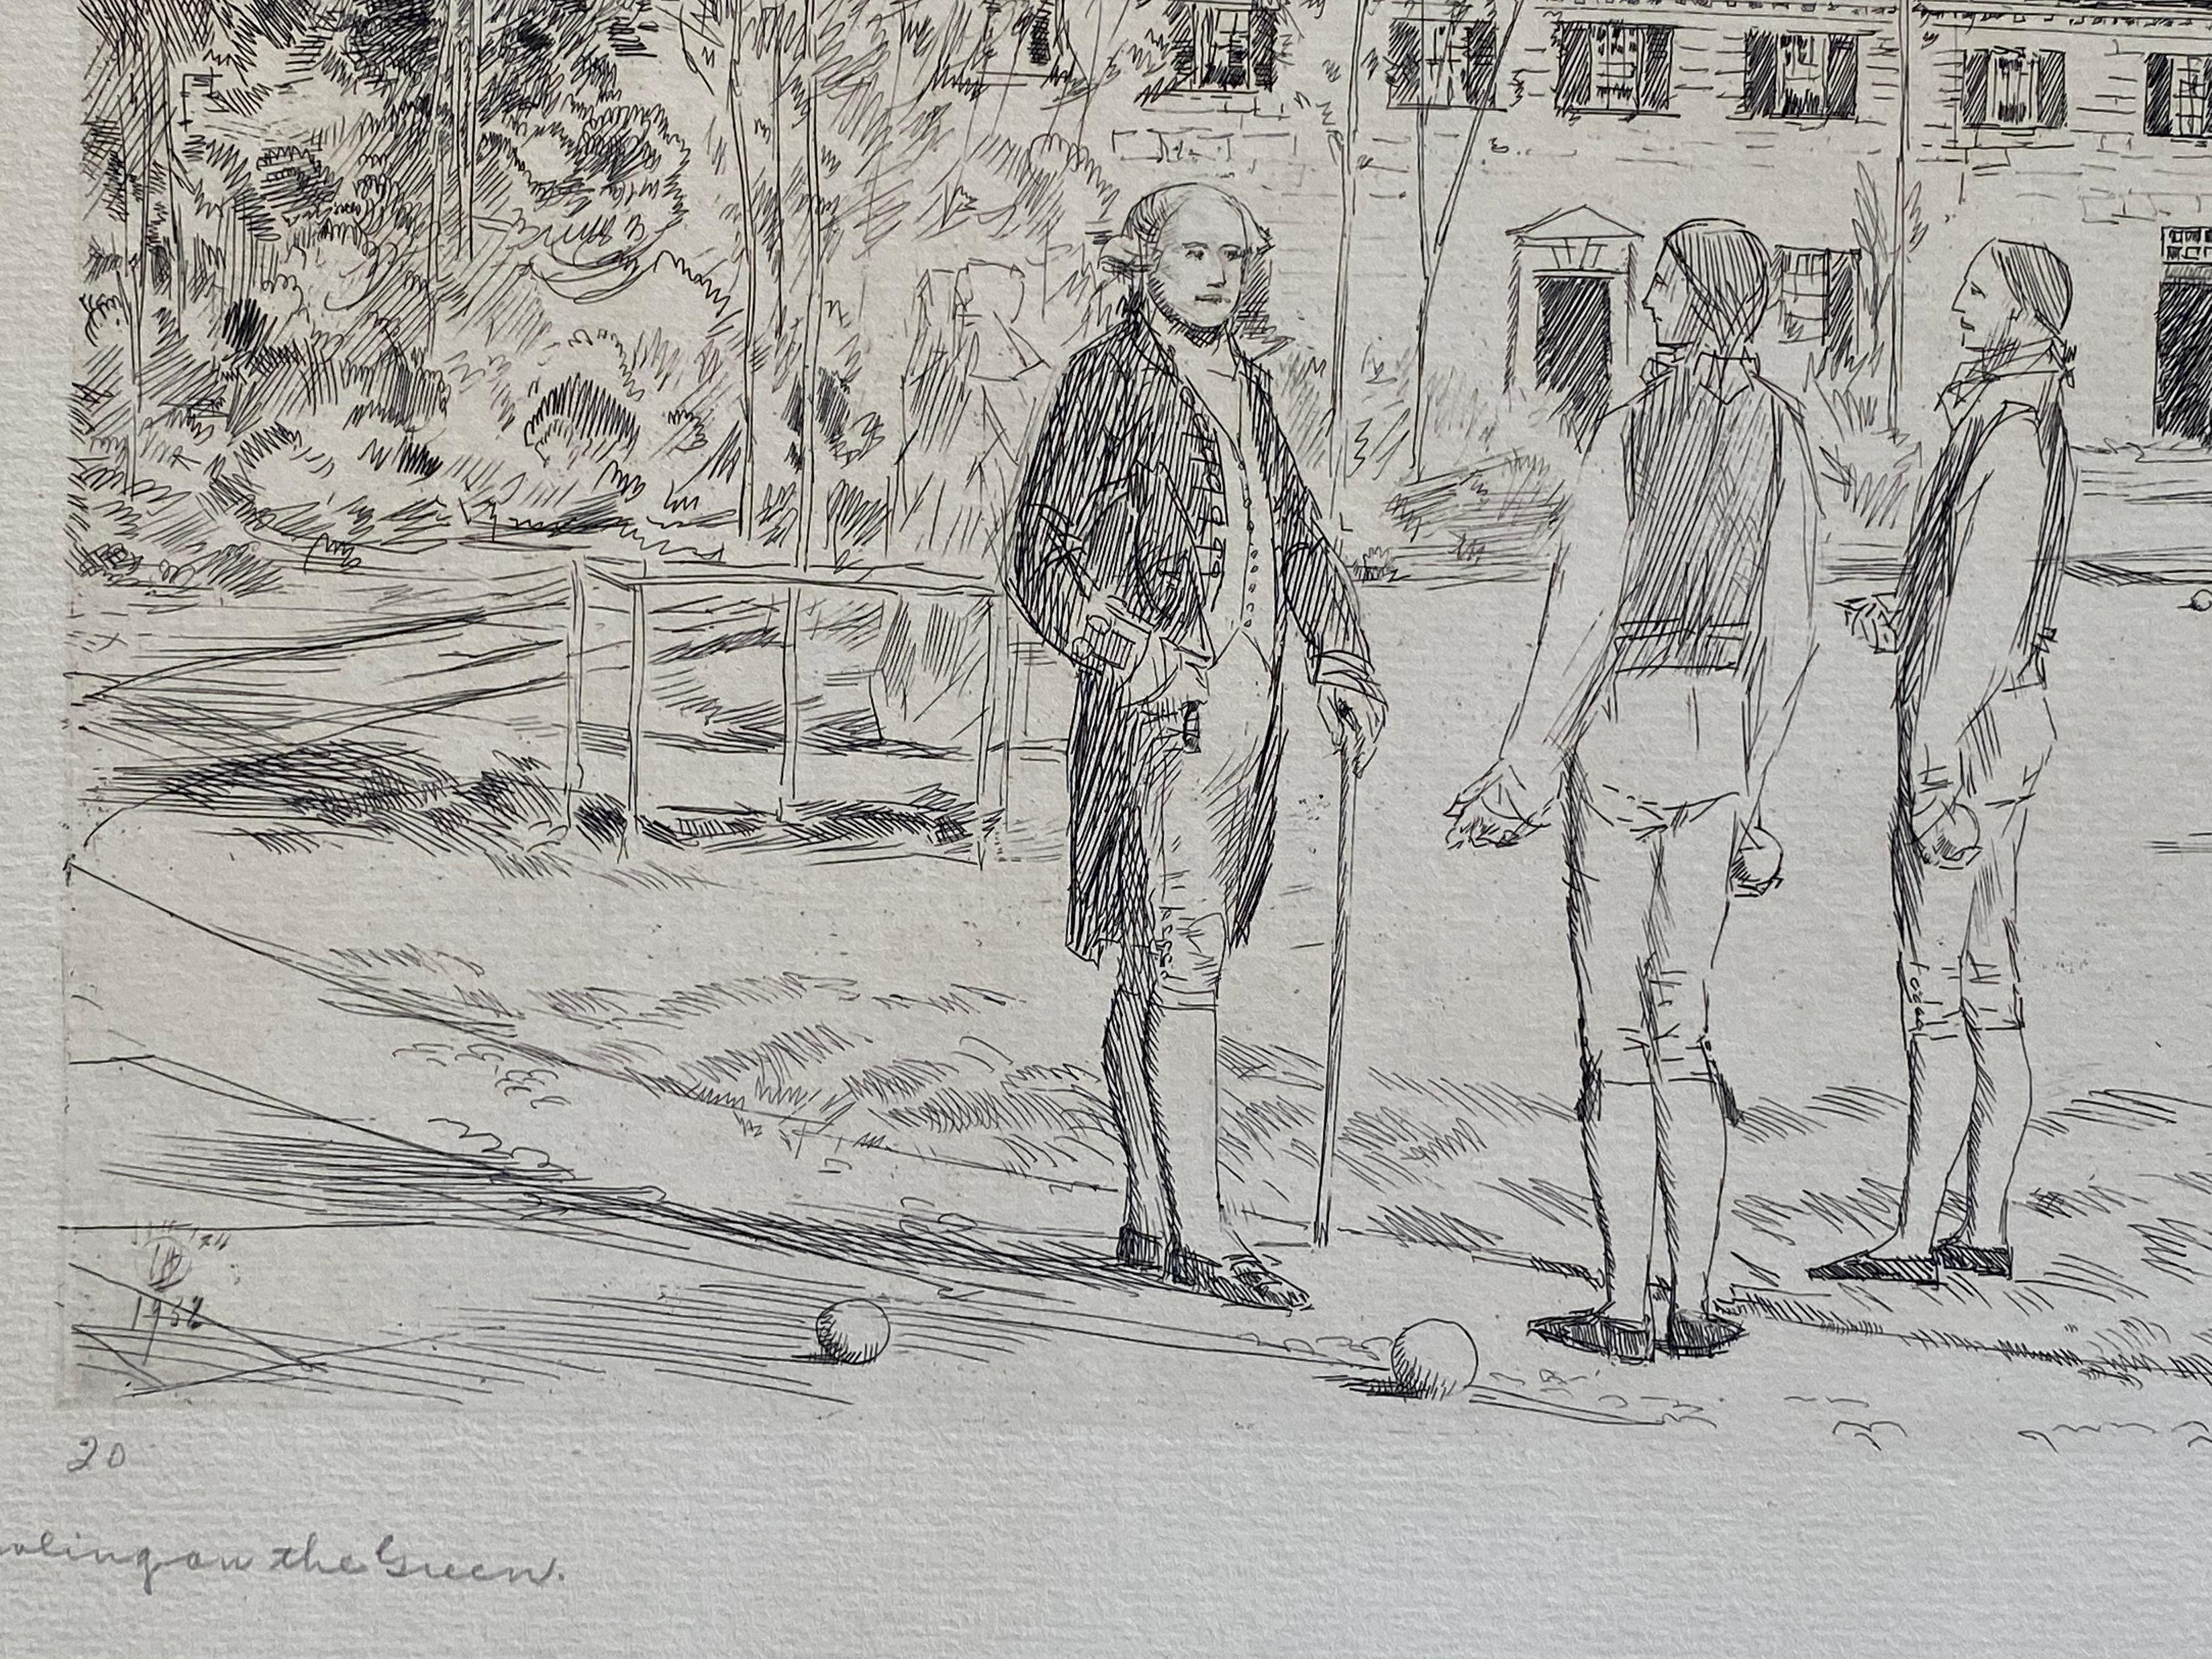 CHILDE HASSAM (American, 1853-1935)
Bowling on the Green, from The Bicentennial Pageant of George Washington (C. 377), 1931-32
Etching printed on laid paper, initialed in pencil and annotated '20', published by the George Washington Memorial